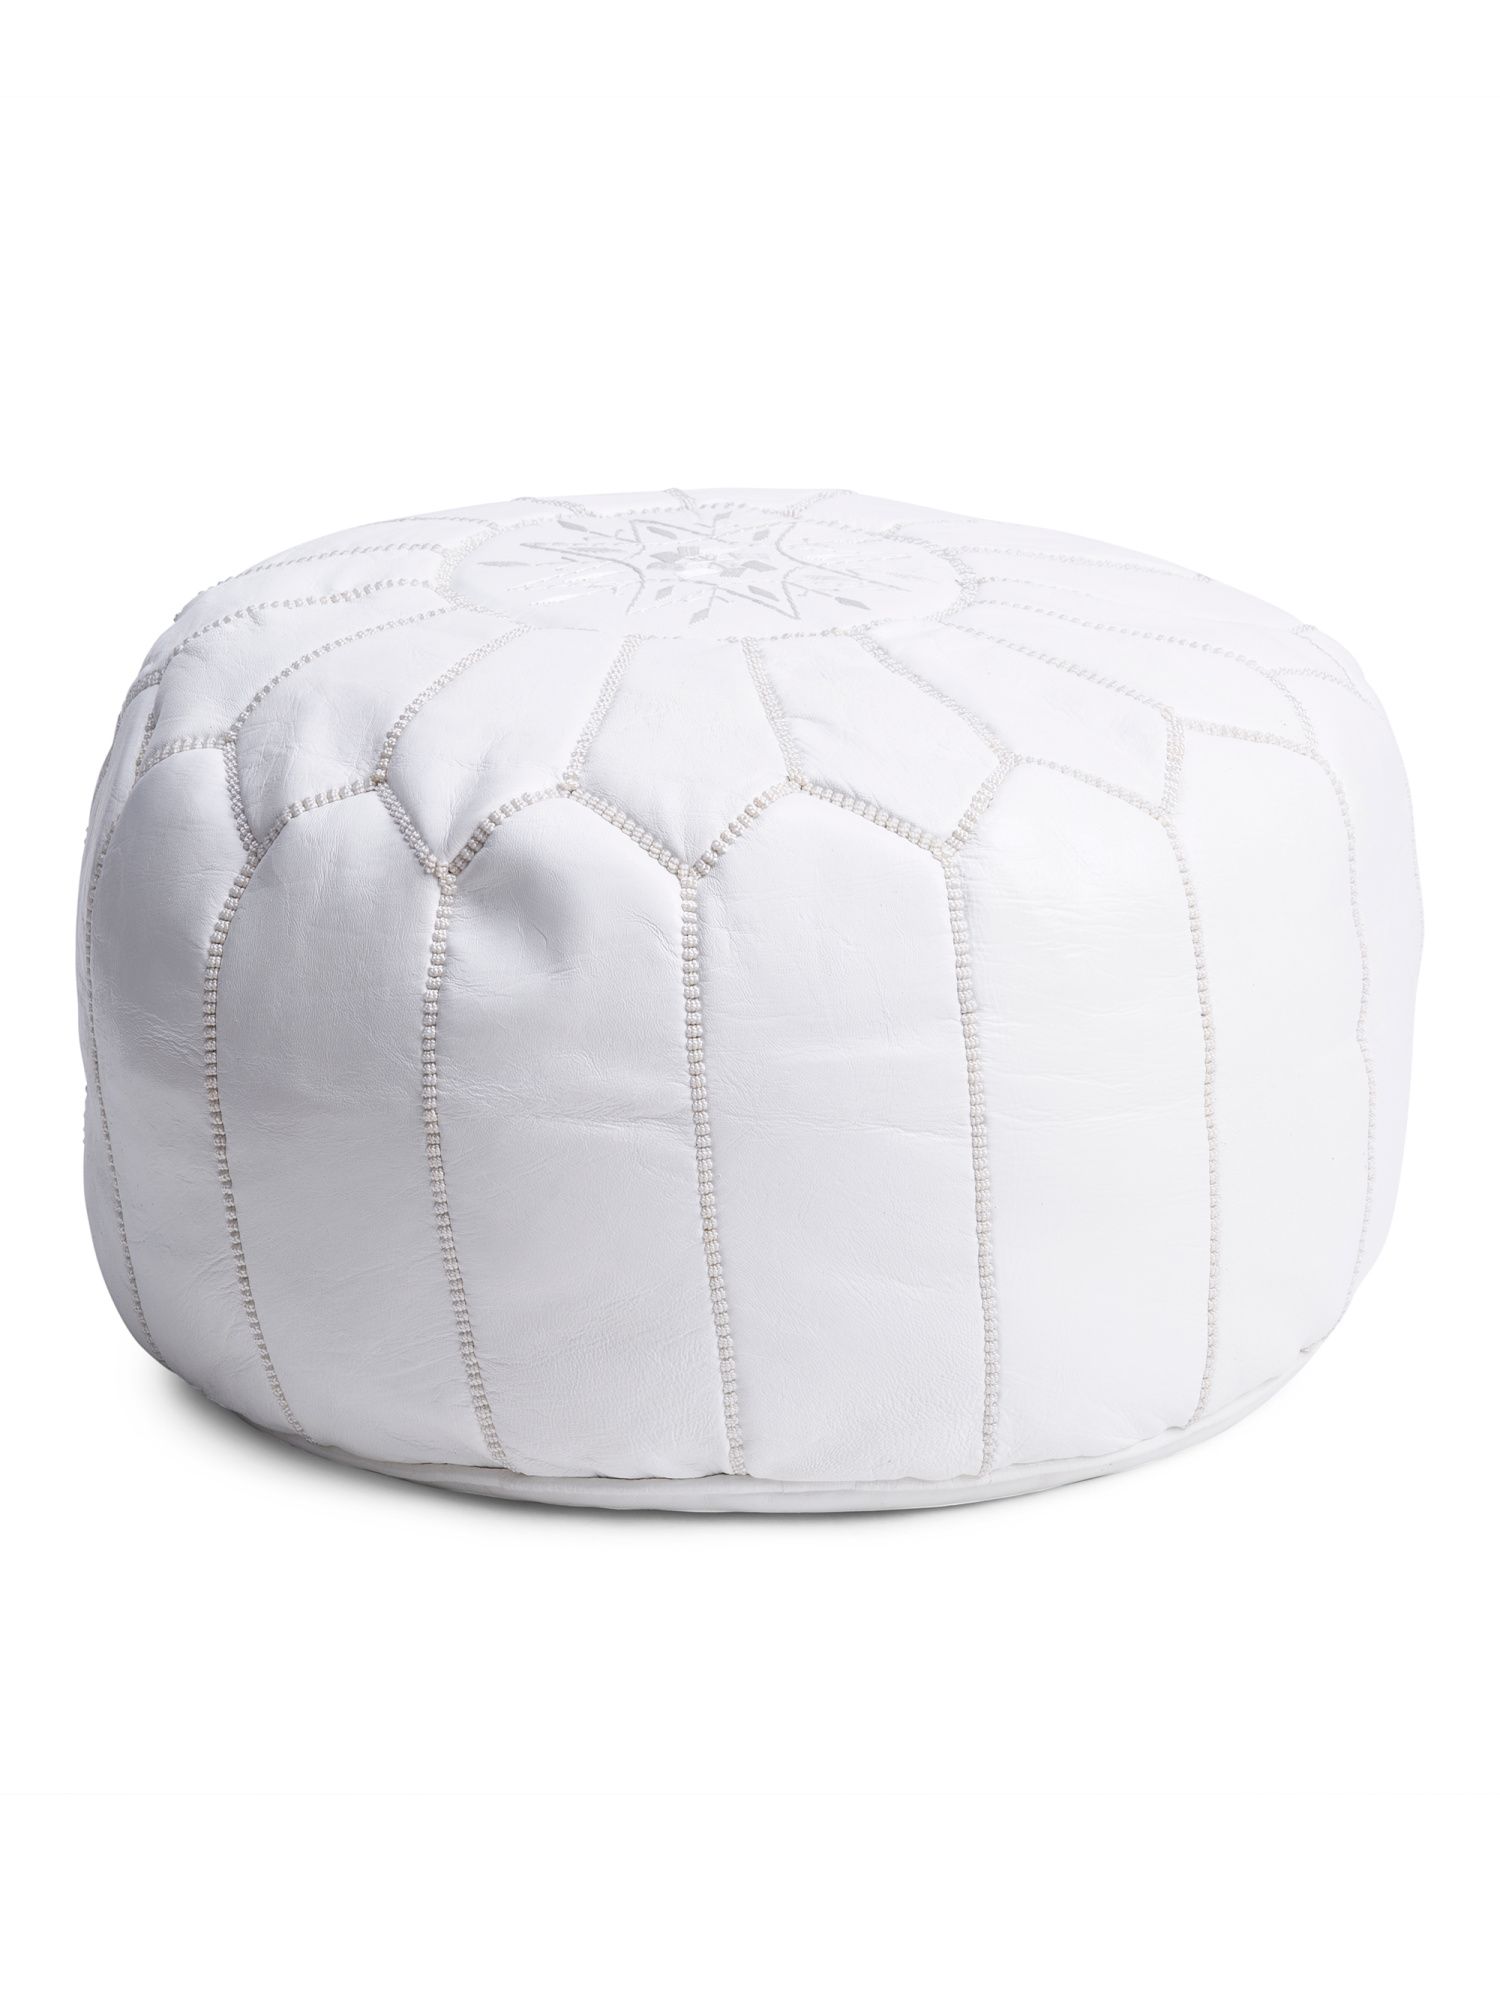 Made In Morocco Hand Stitched Leather Pouf | TJ Maxx